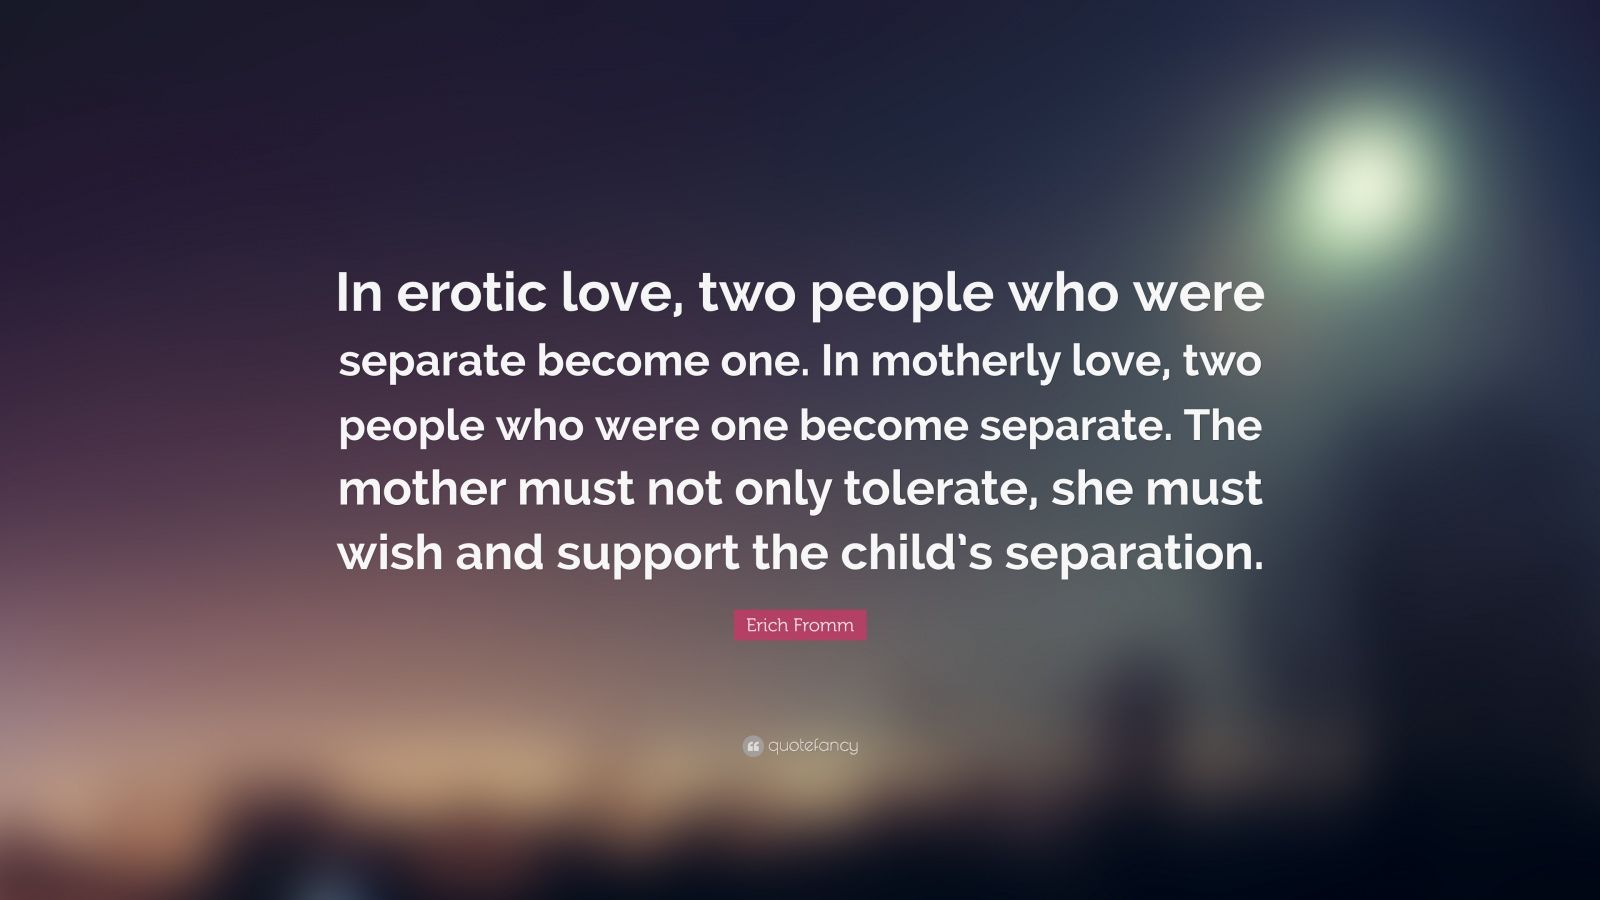 Erich Fromm Quote “In erotic love two people who were separate be e one